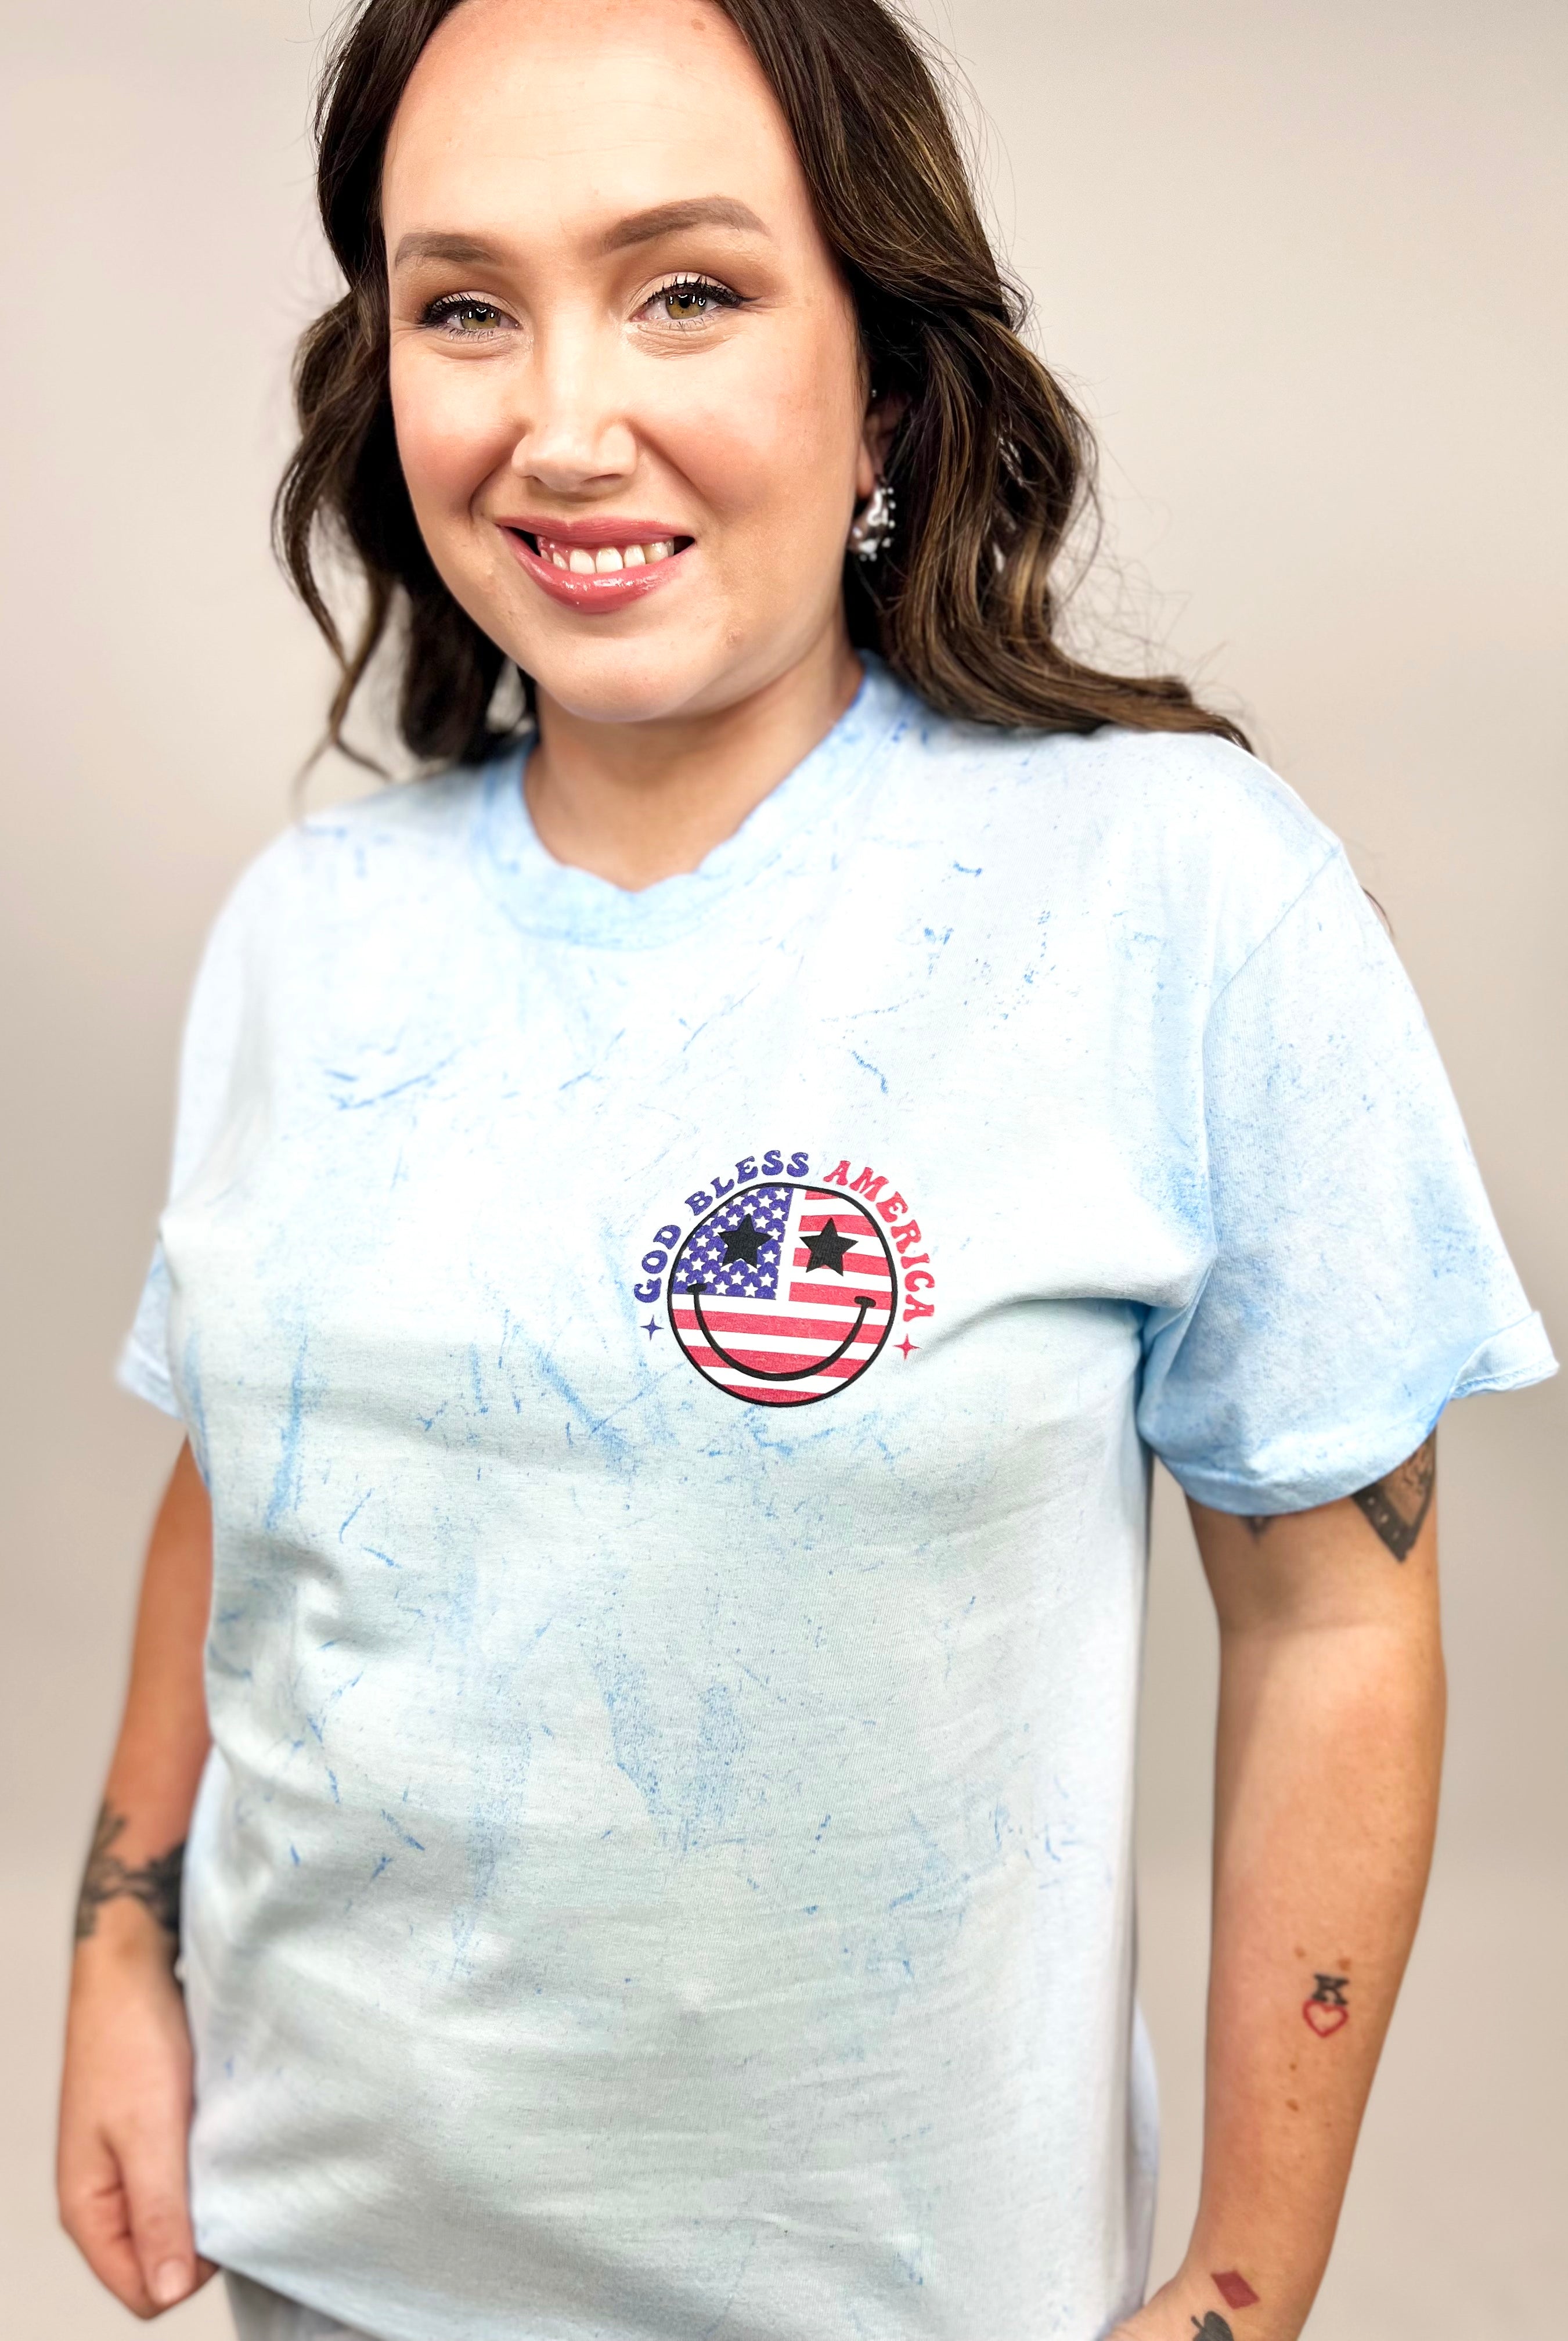 God Bless America Graphic Tee-130 Graphic Tees-Heathered Boho-Heathered Boho Boutique, Women's Fashion and Accessories in Palmetto, FL